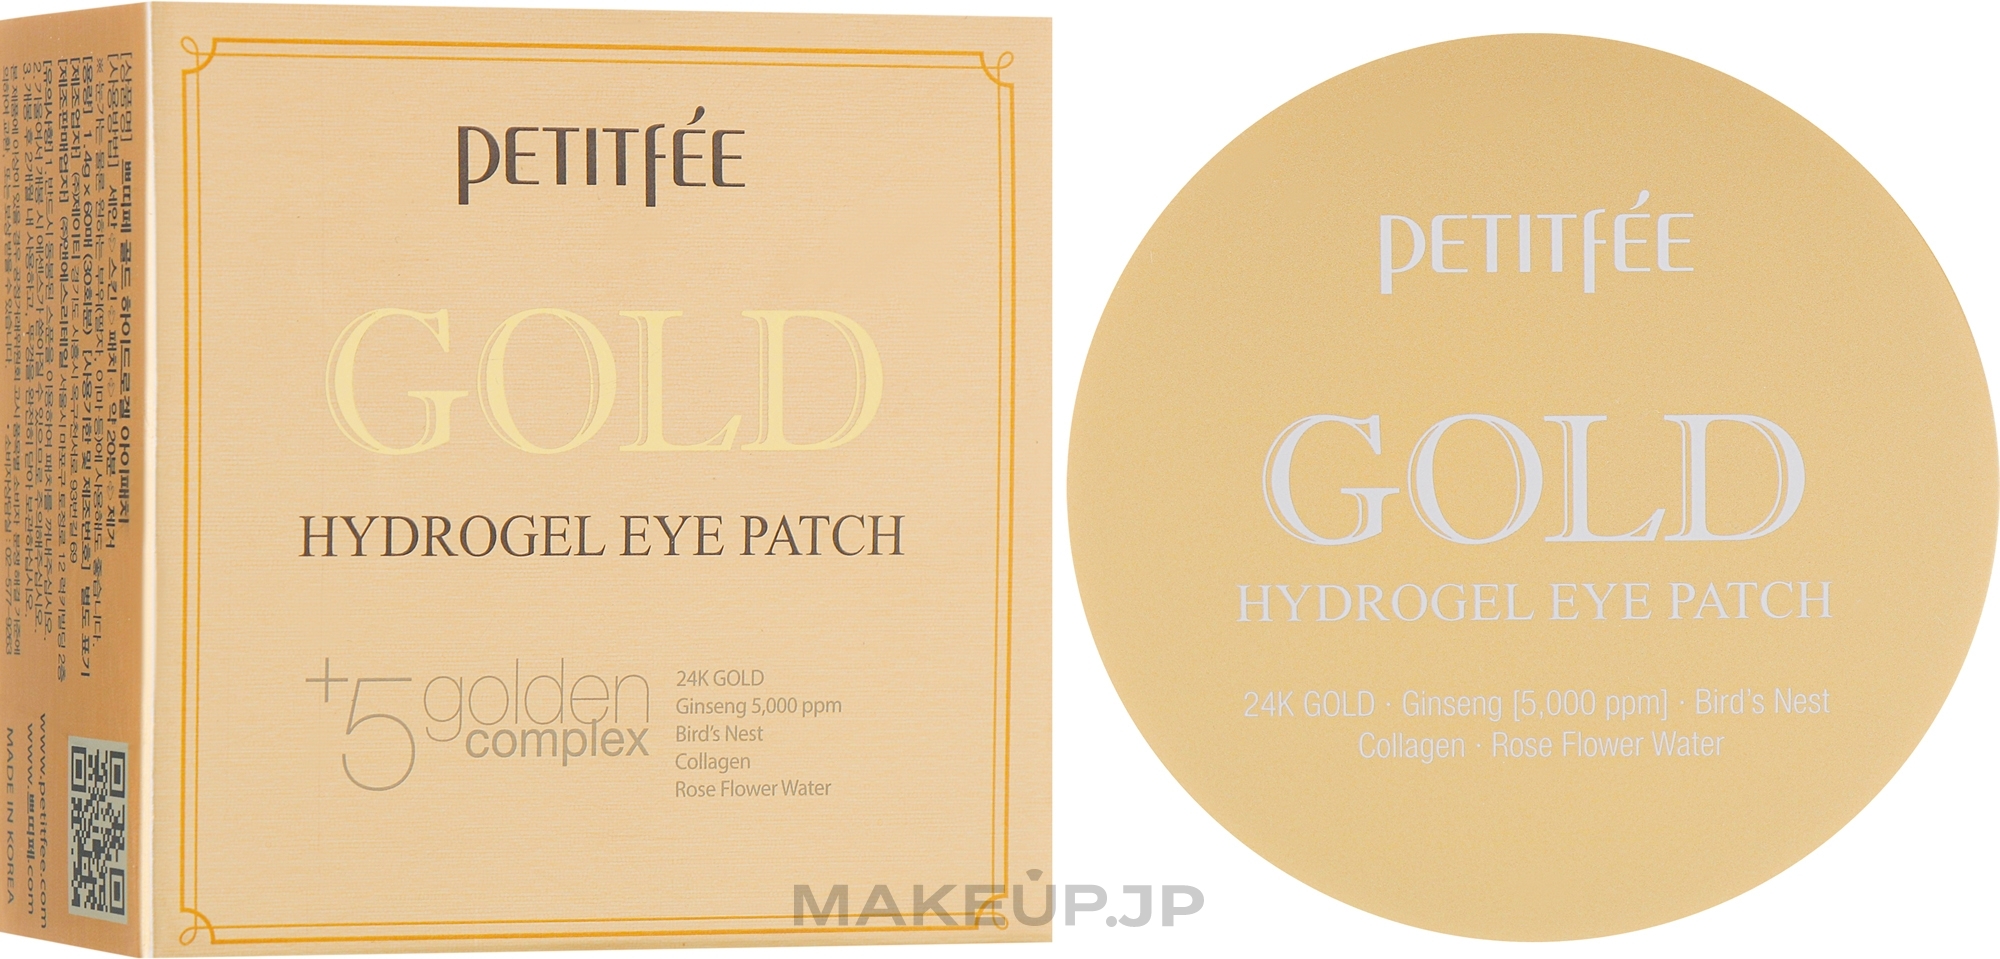 Hydrogel Eye Patches with Golden Complex +5 - Petitfee&Koelf Gold Hydrogel Eye Patch — photo 60 szt.